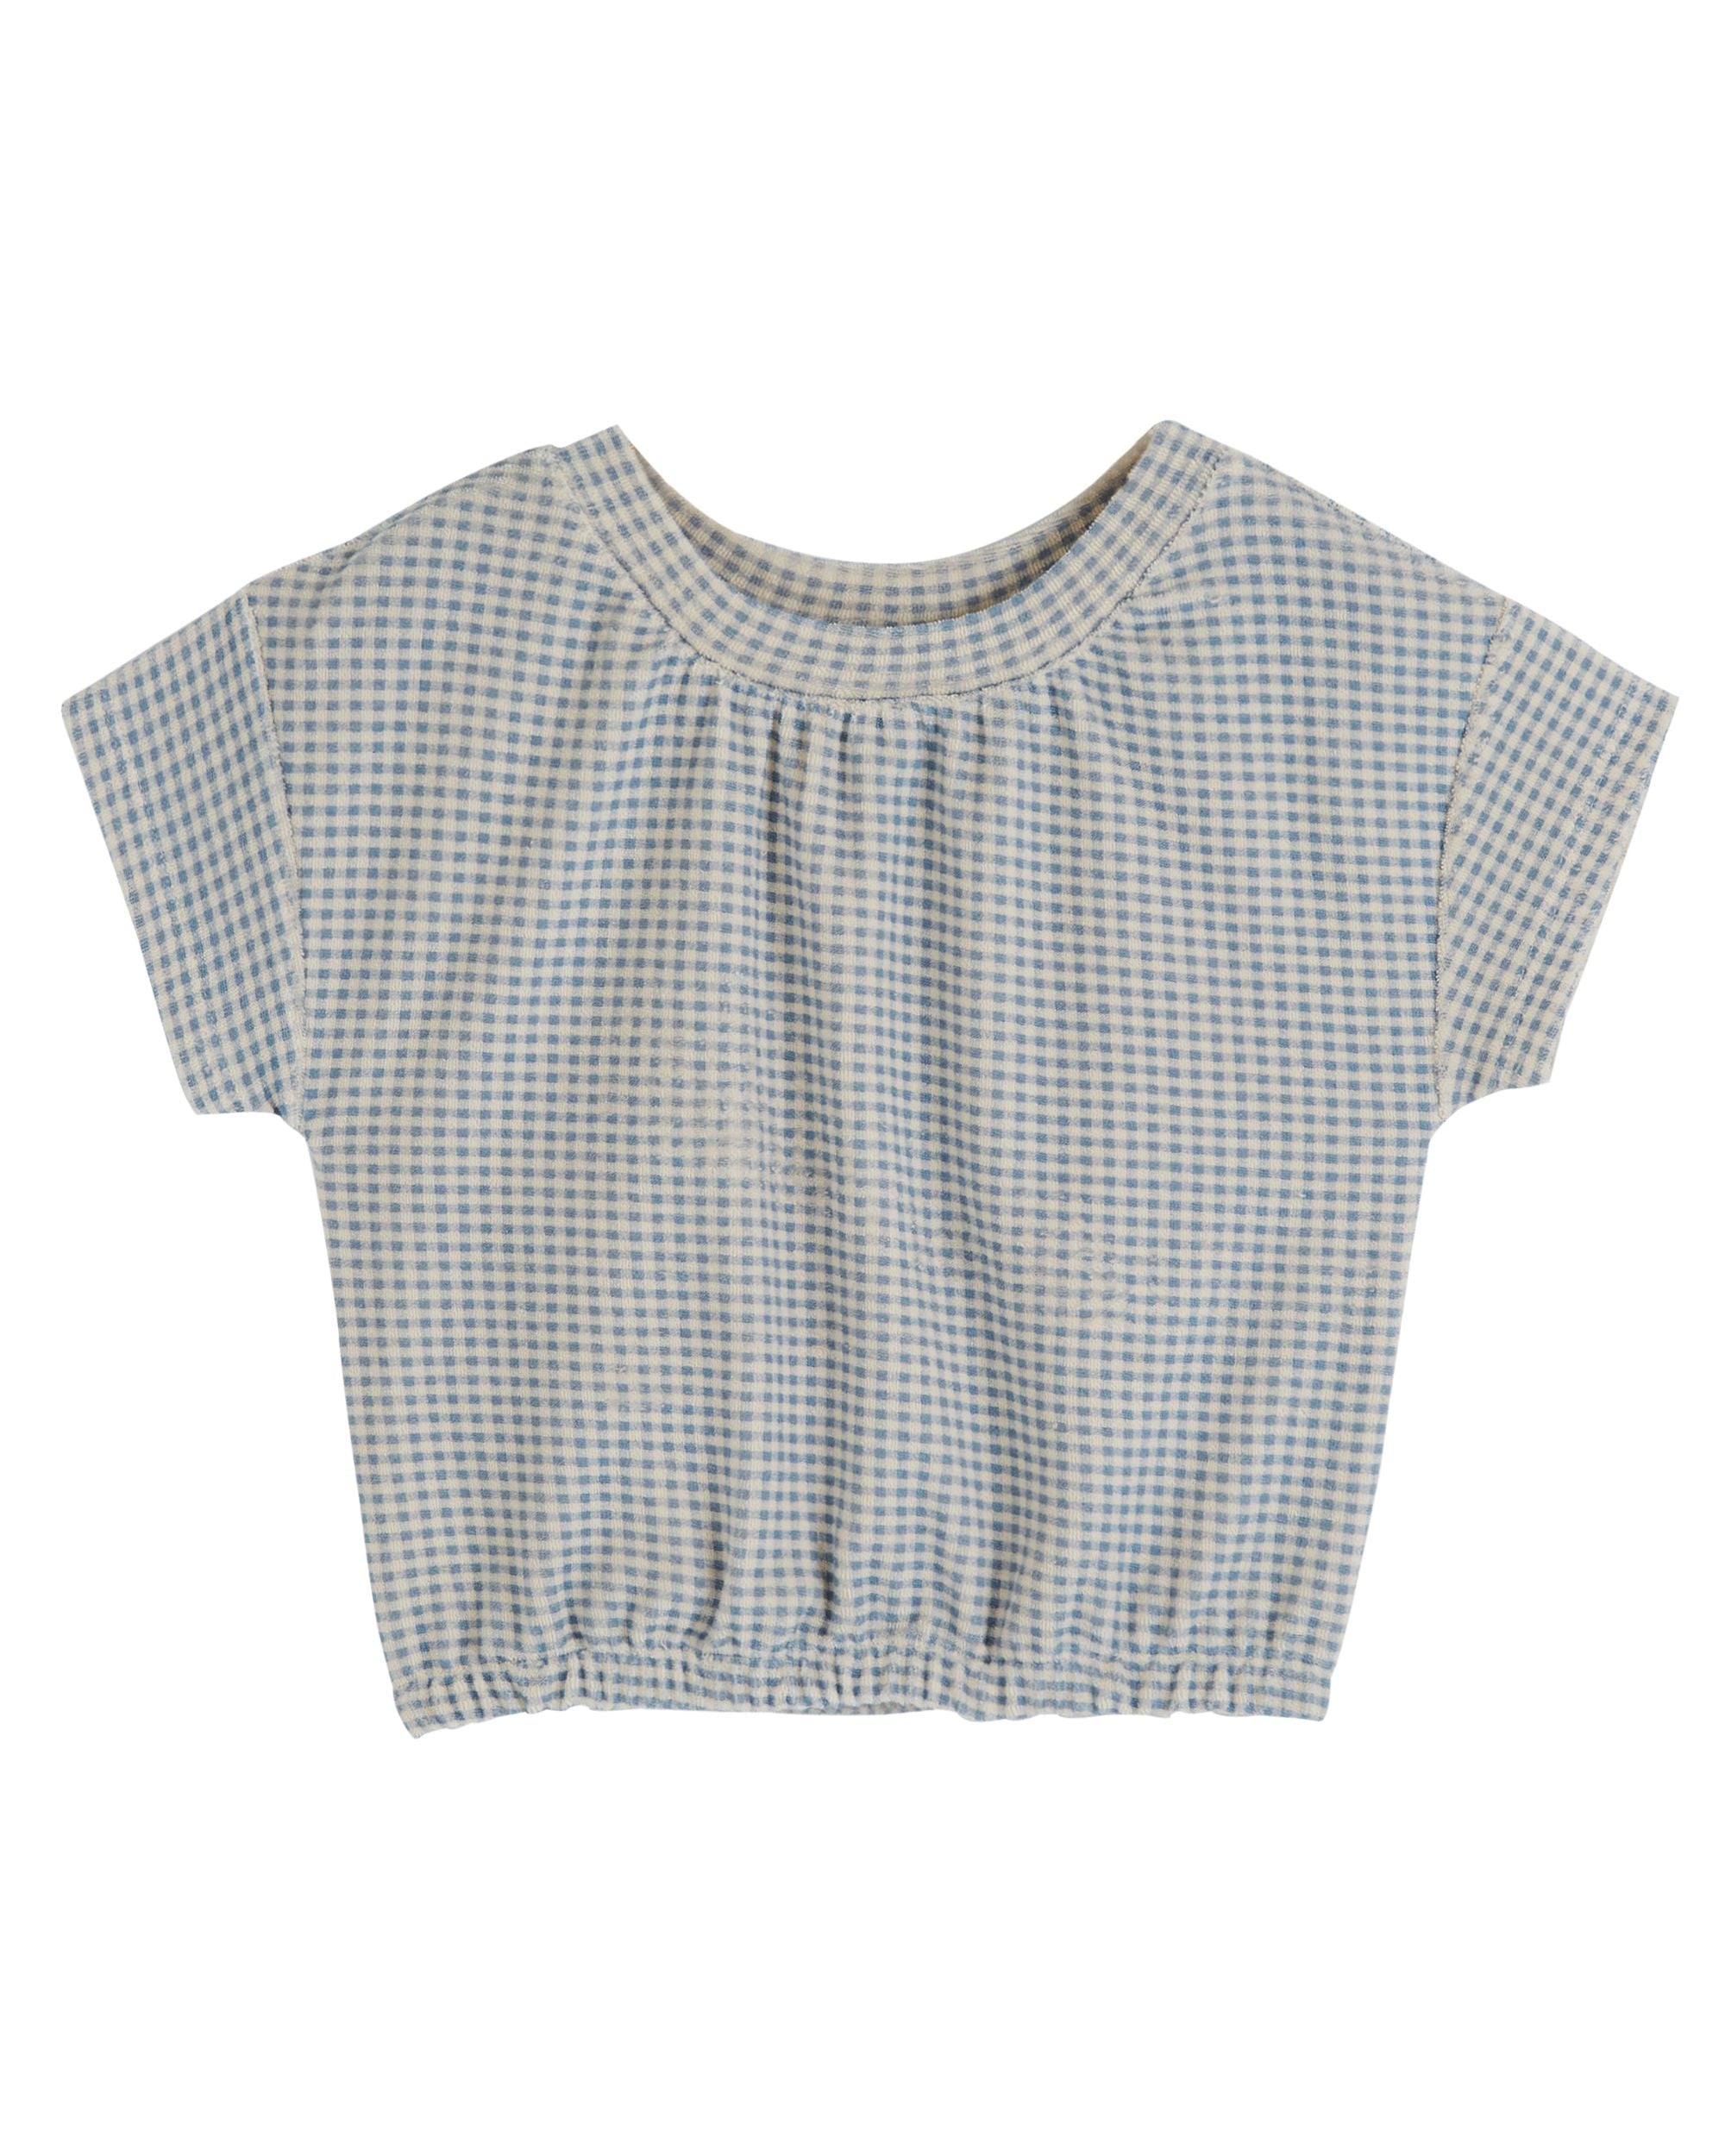 Terry Gingham Top